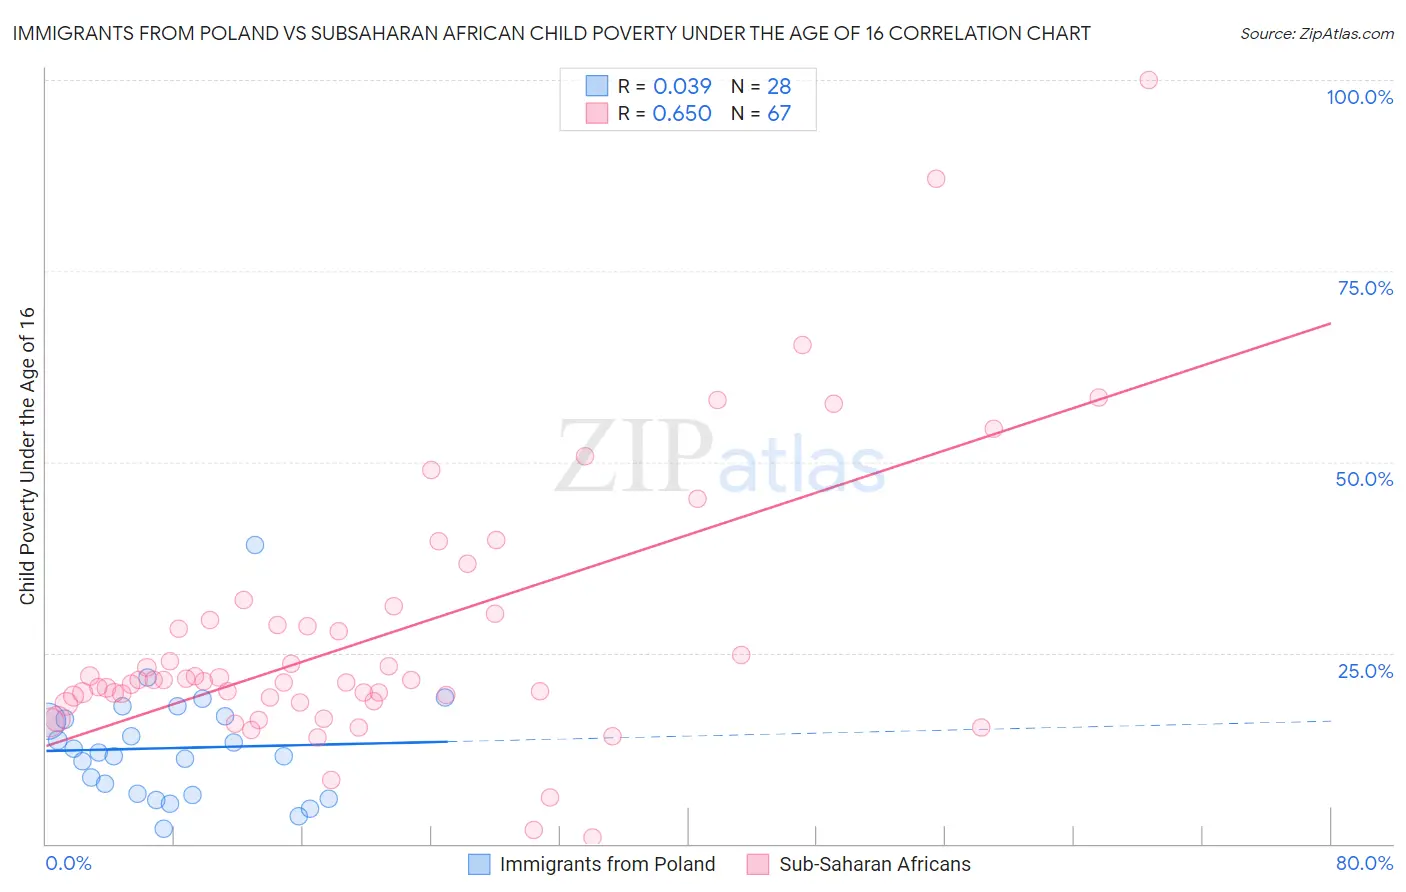 Immigrants from Poland vs Subsaharan African Child Poverty Under the Age of 16